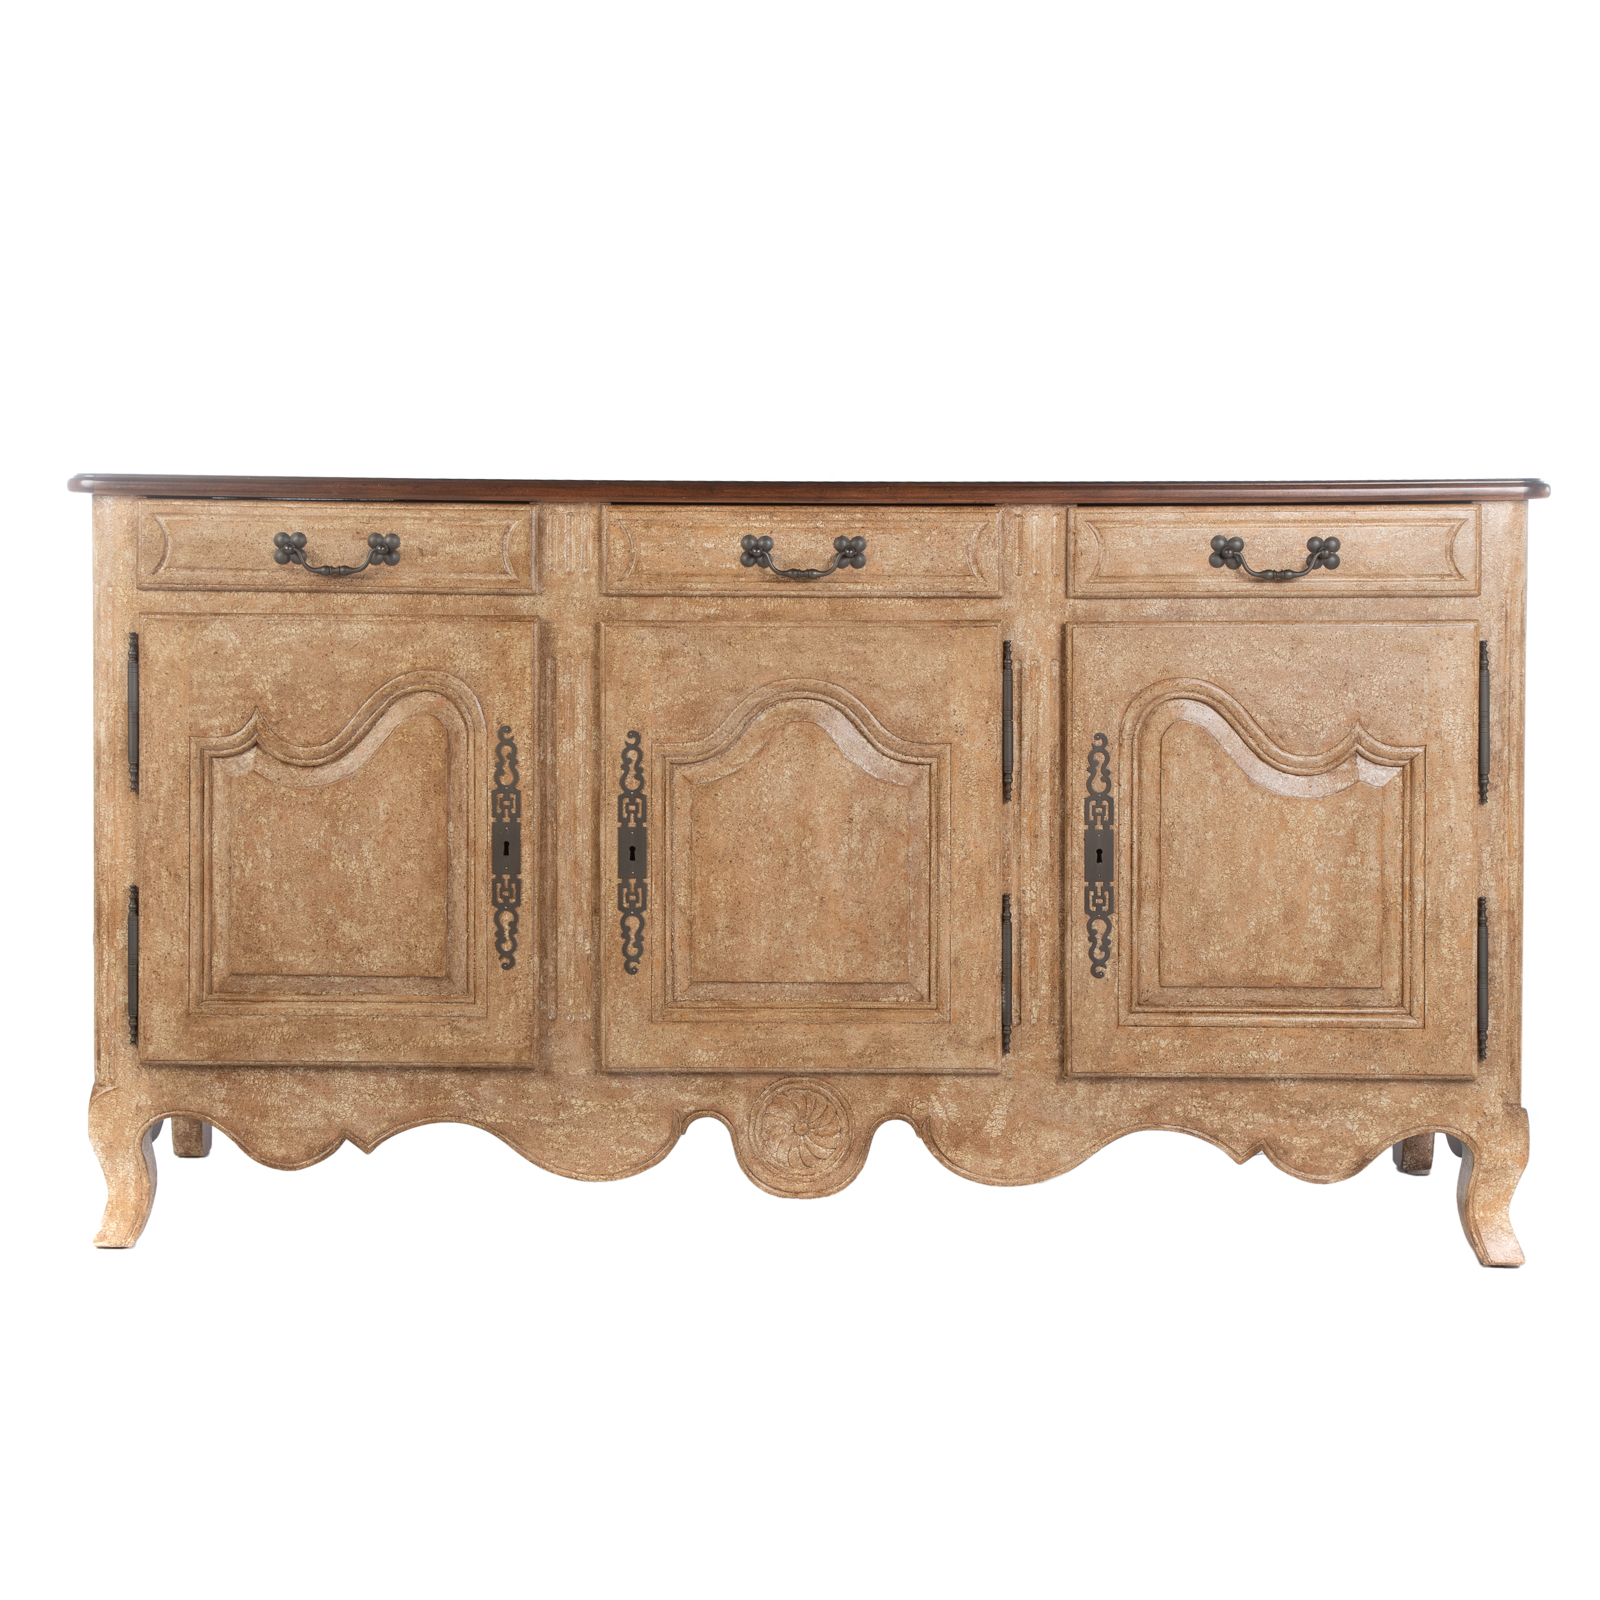 CUSTOM FRENCH COUNTRY BUFFET CONSOLE